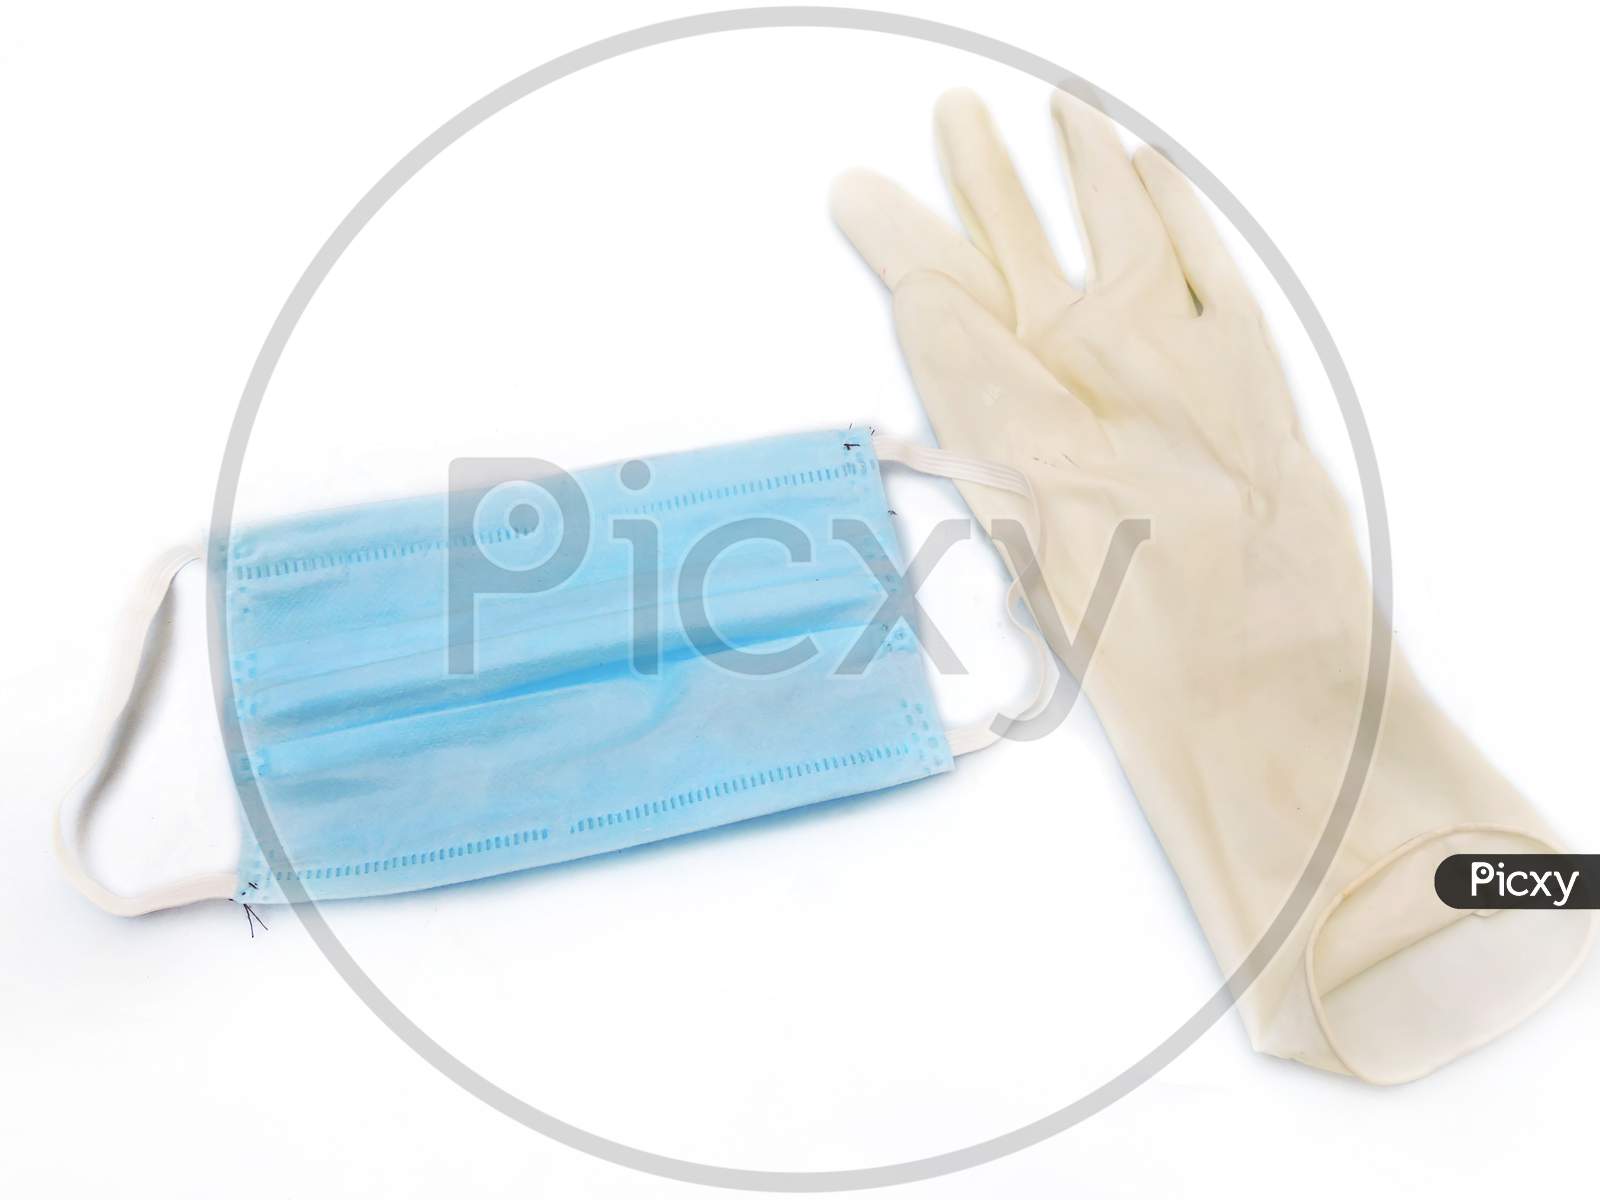 Surgical mask and gloves